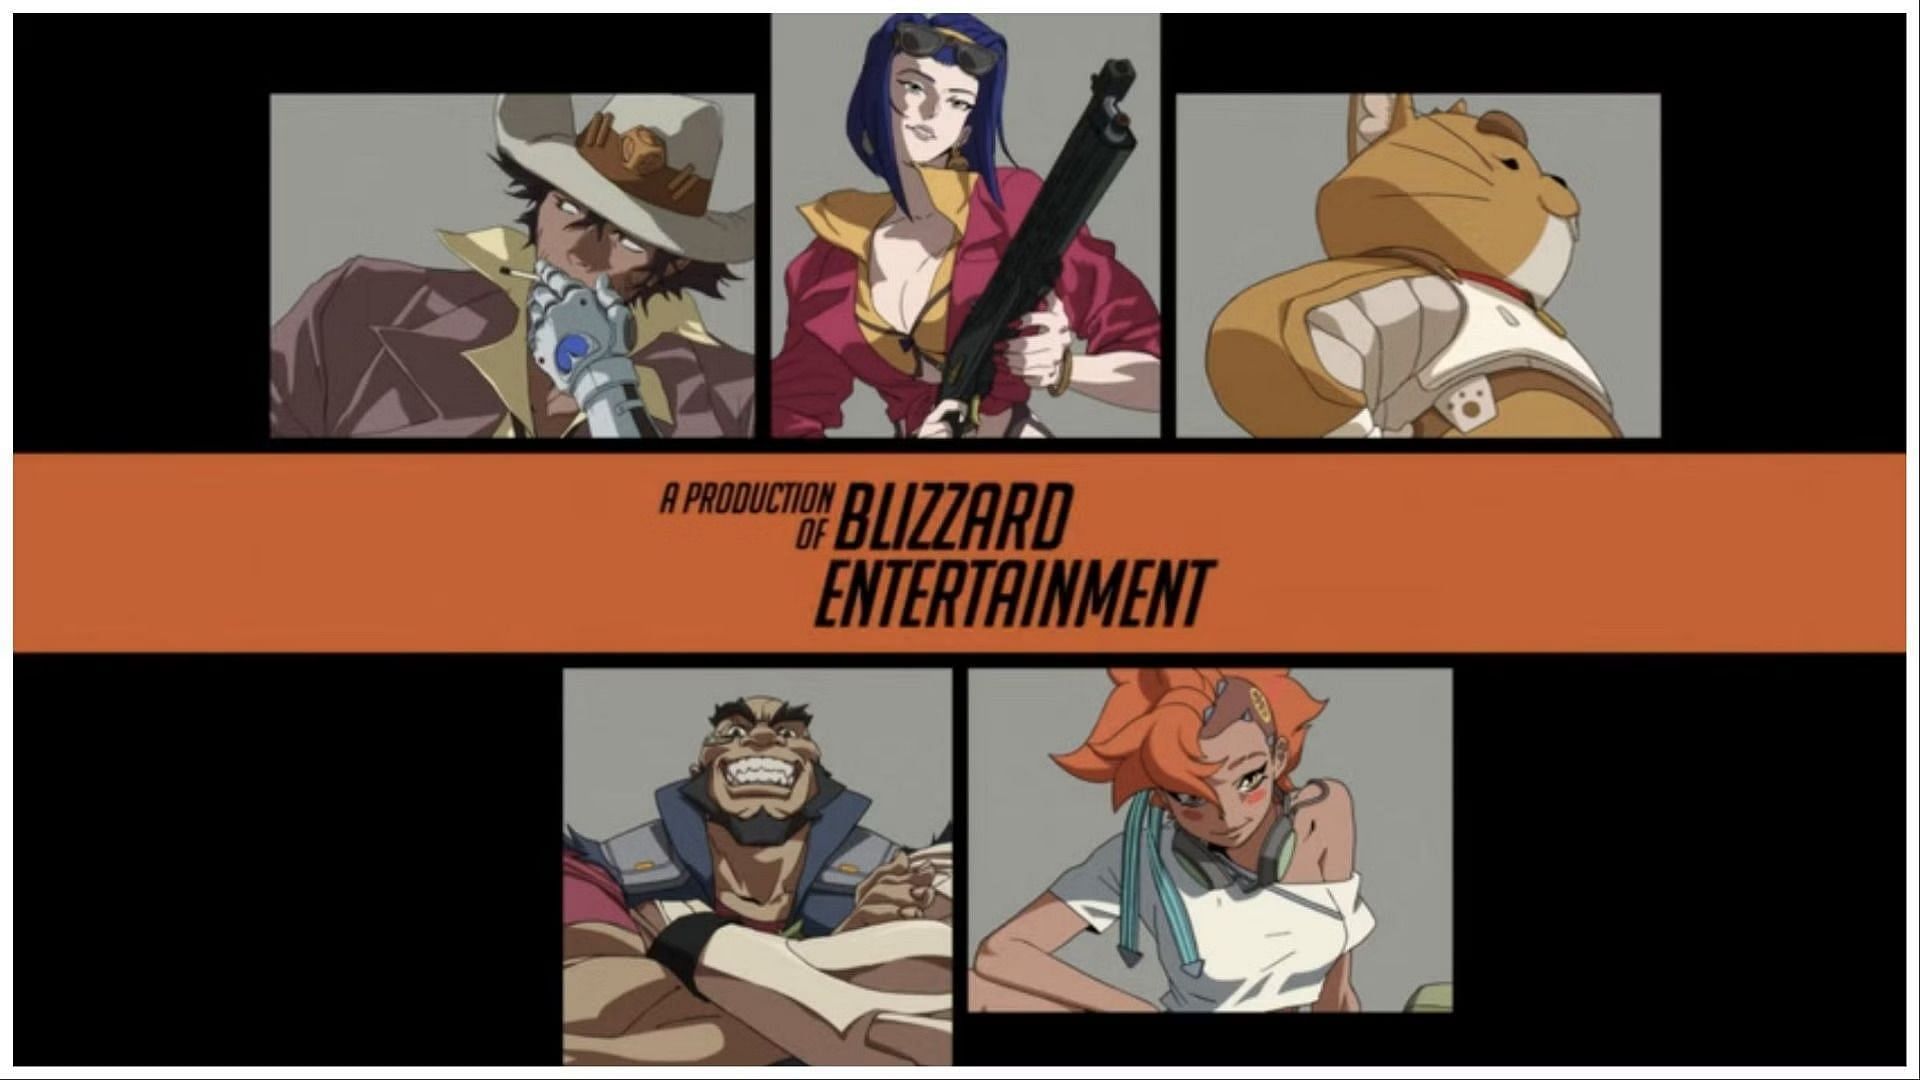 All Overwatch 2 x Cowboy Bebop collaboratiion characters as seen in the launch video (Image via Blizzard Entertainment)